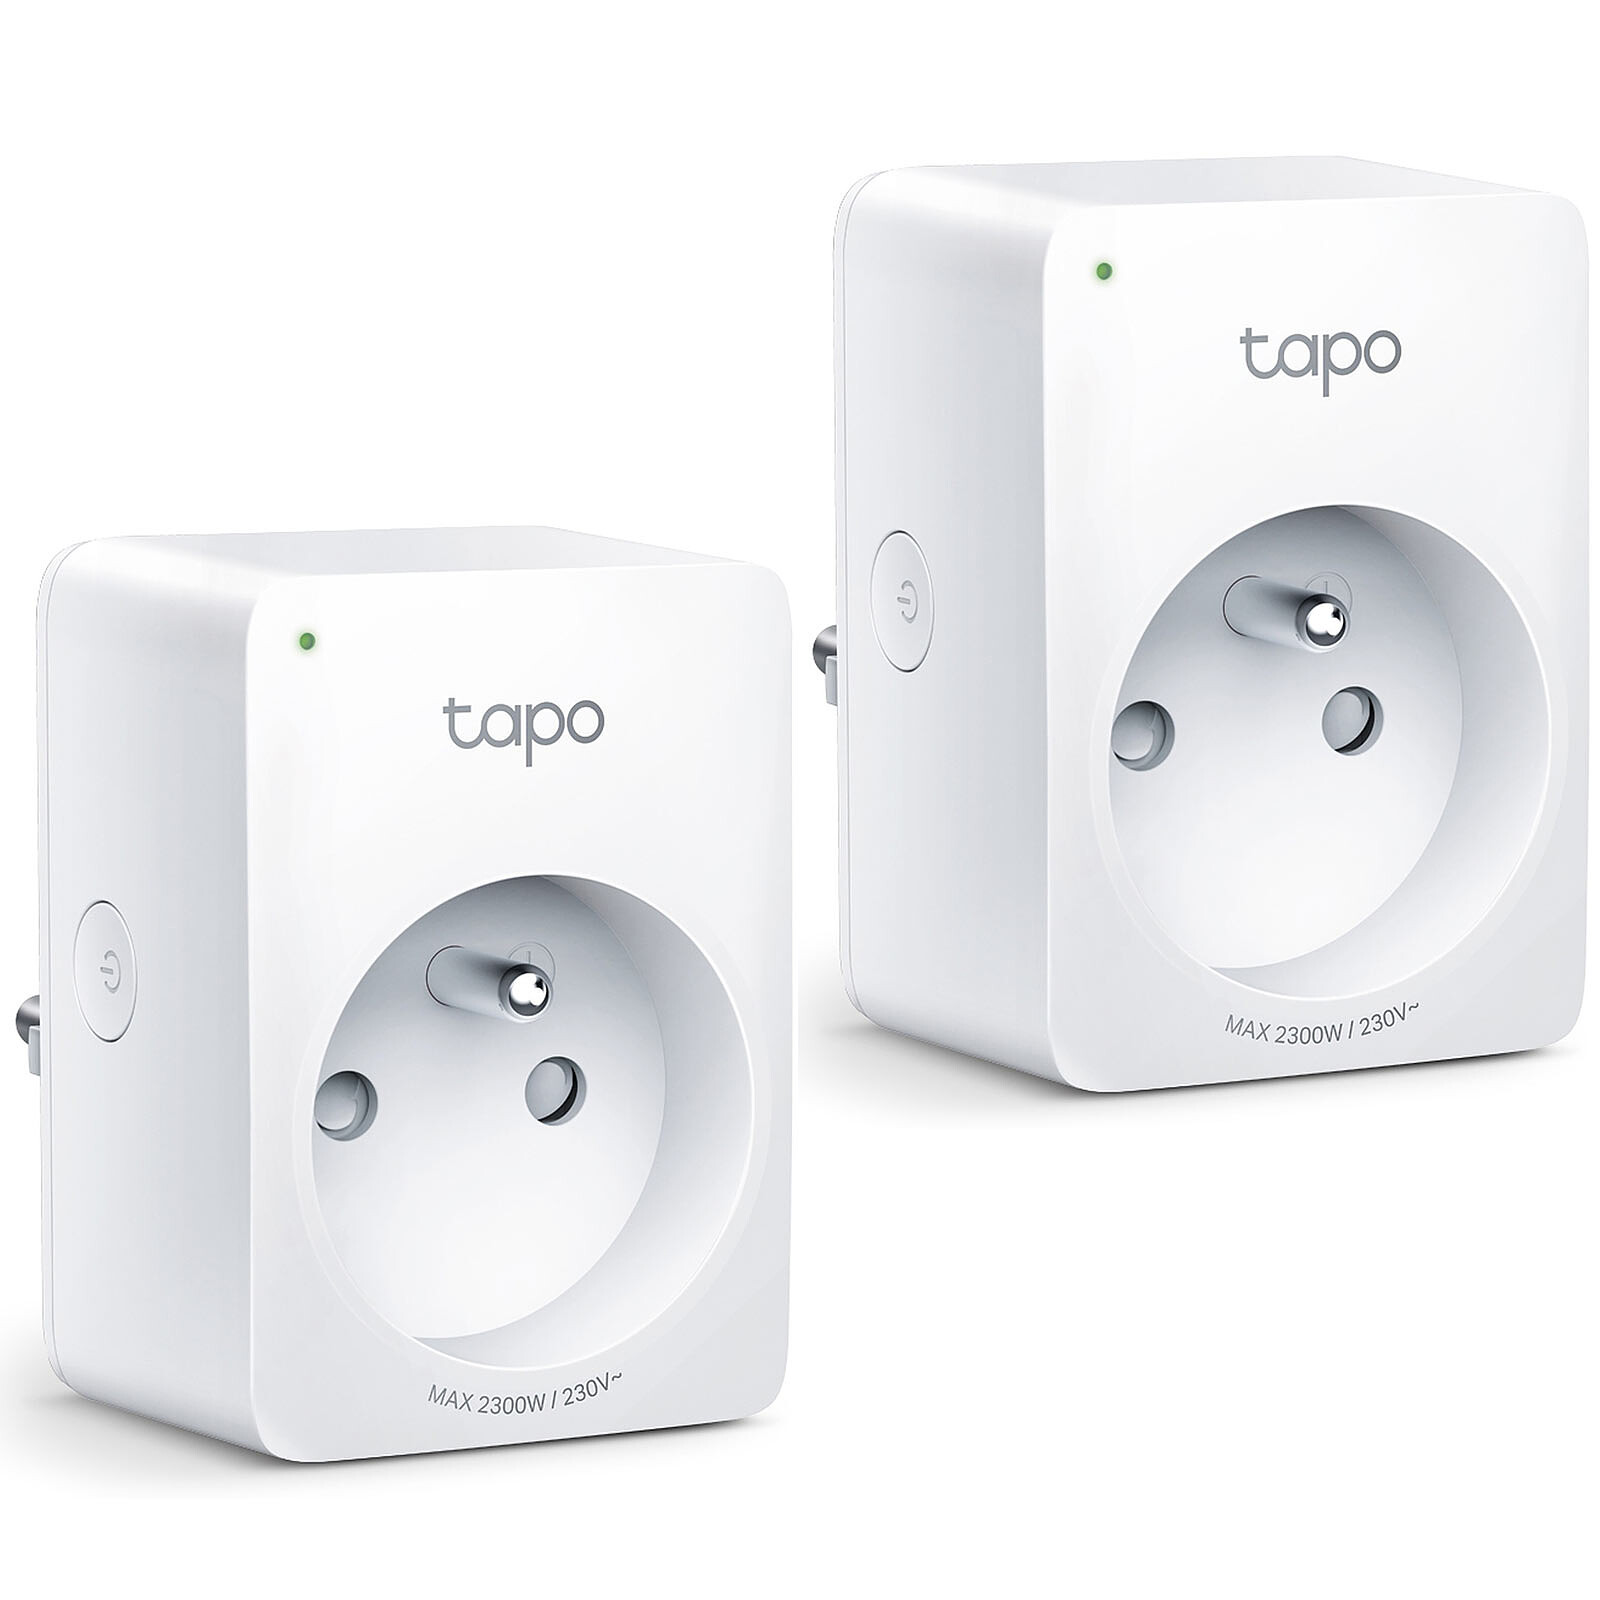 TP-Link Tapo Smart Plug Mini, Smart Home Wifi Outlet Works with